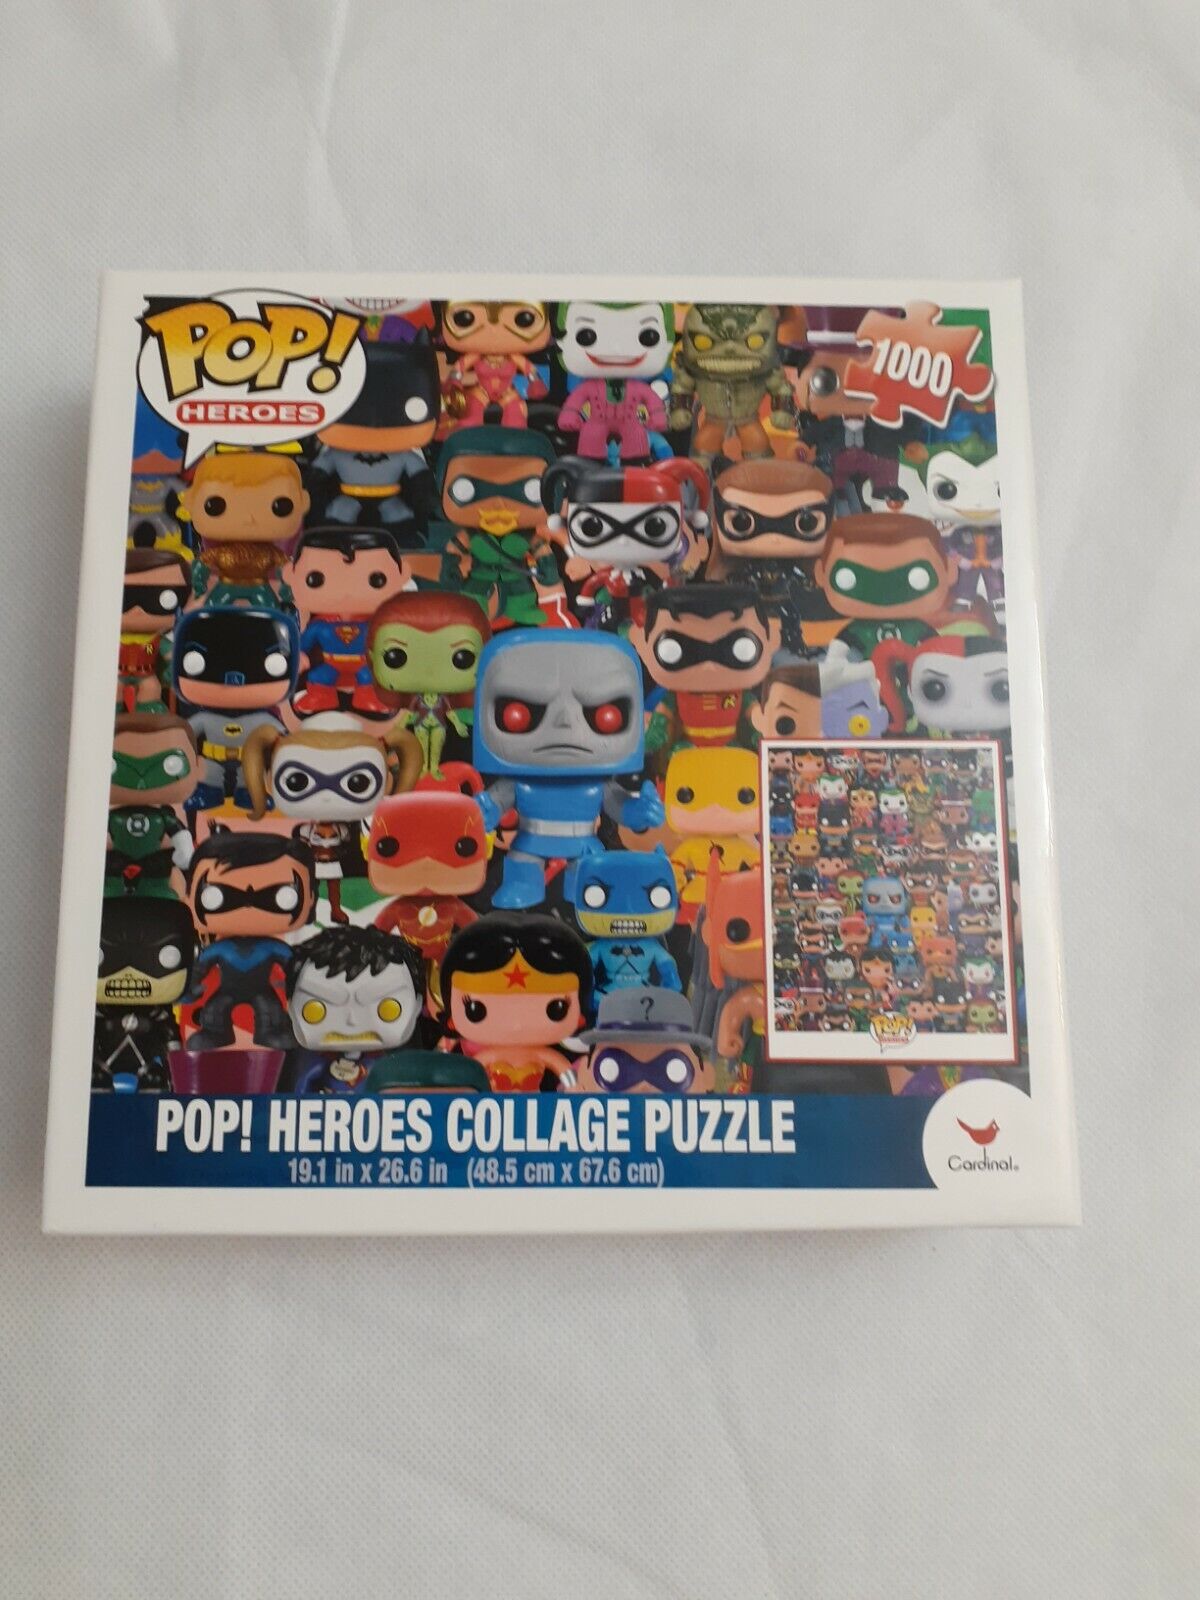 Pop Heroes Collage 1000 PC Puzzle Funko Cardinal DC 2015 for sale online